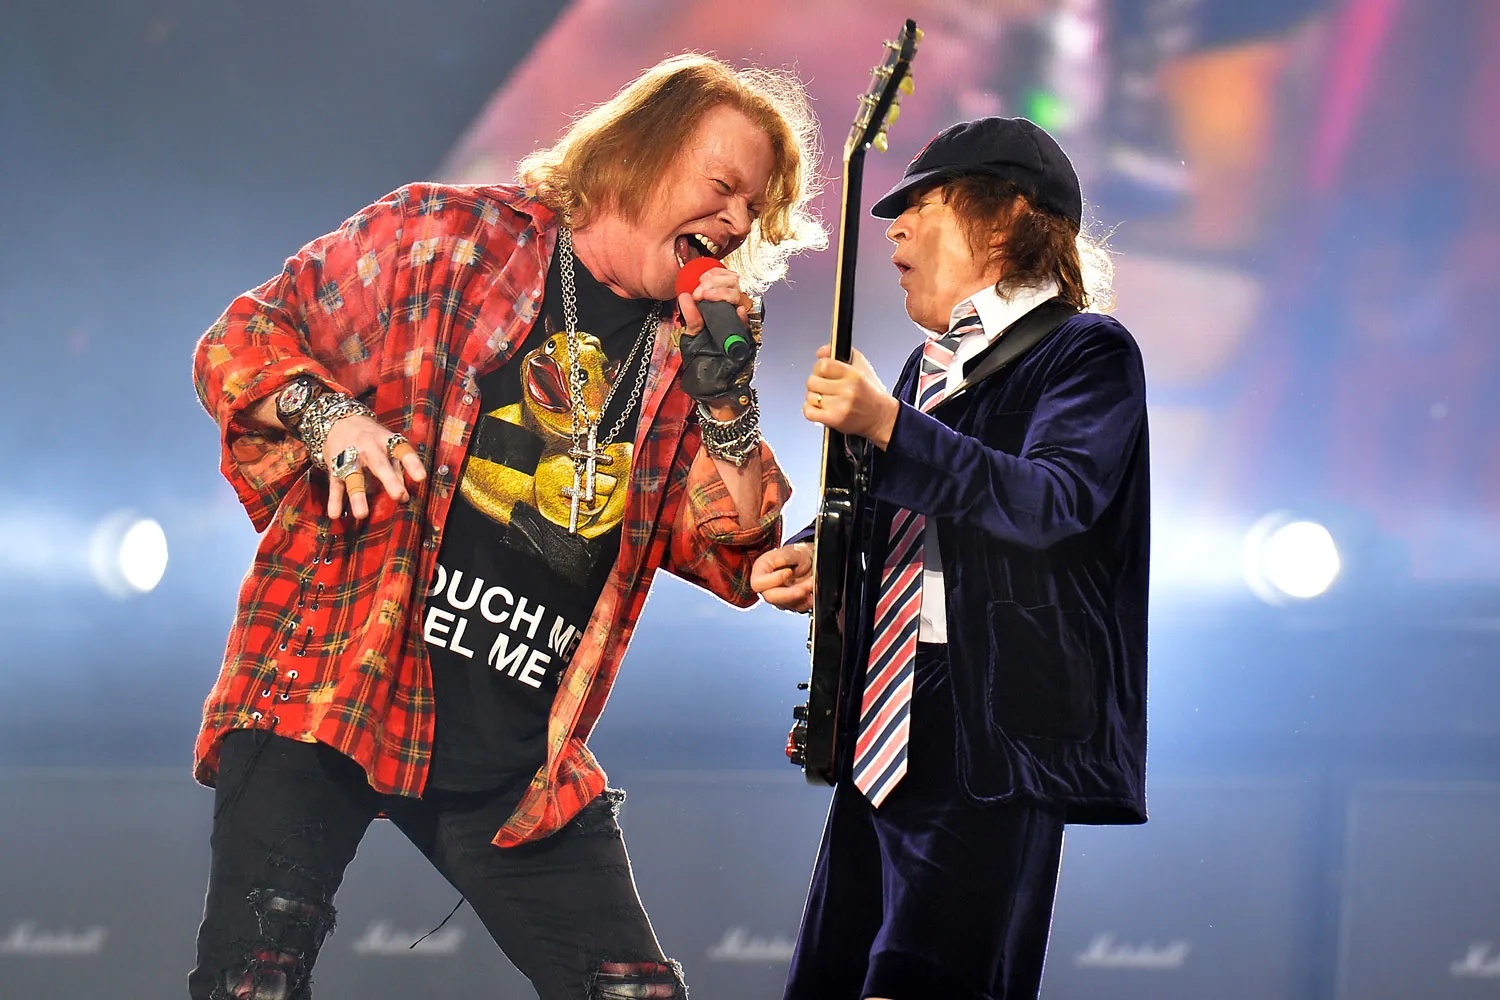 Axl Rose performing with Angus Young of the band AC/DC 